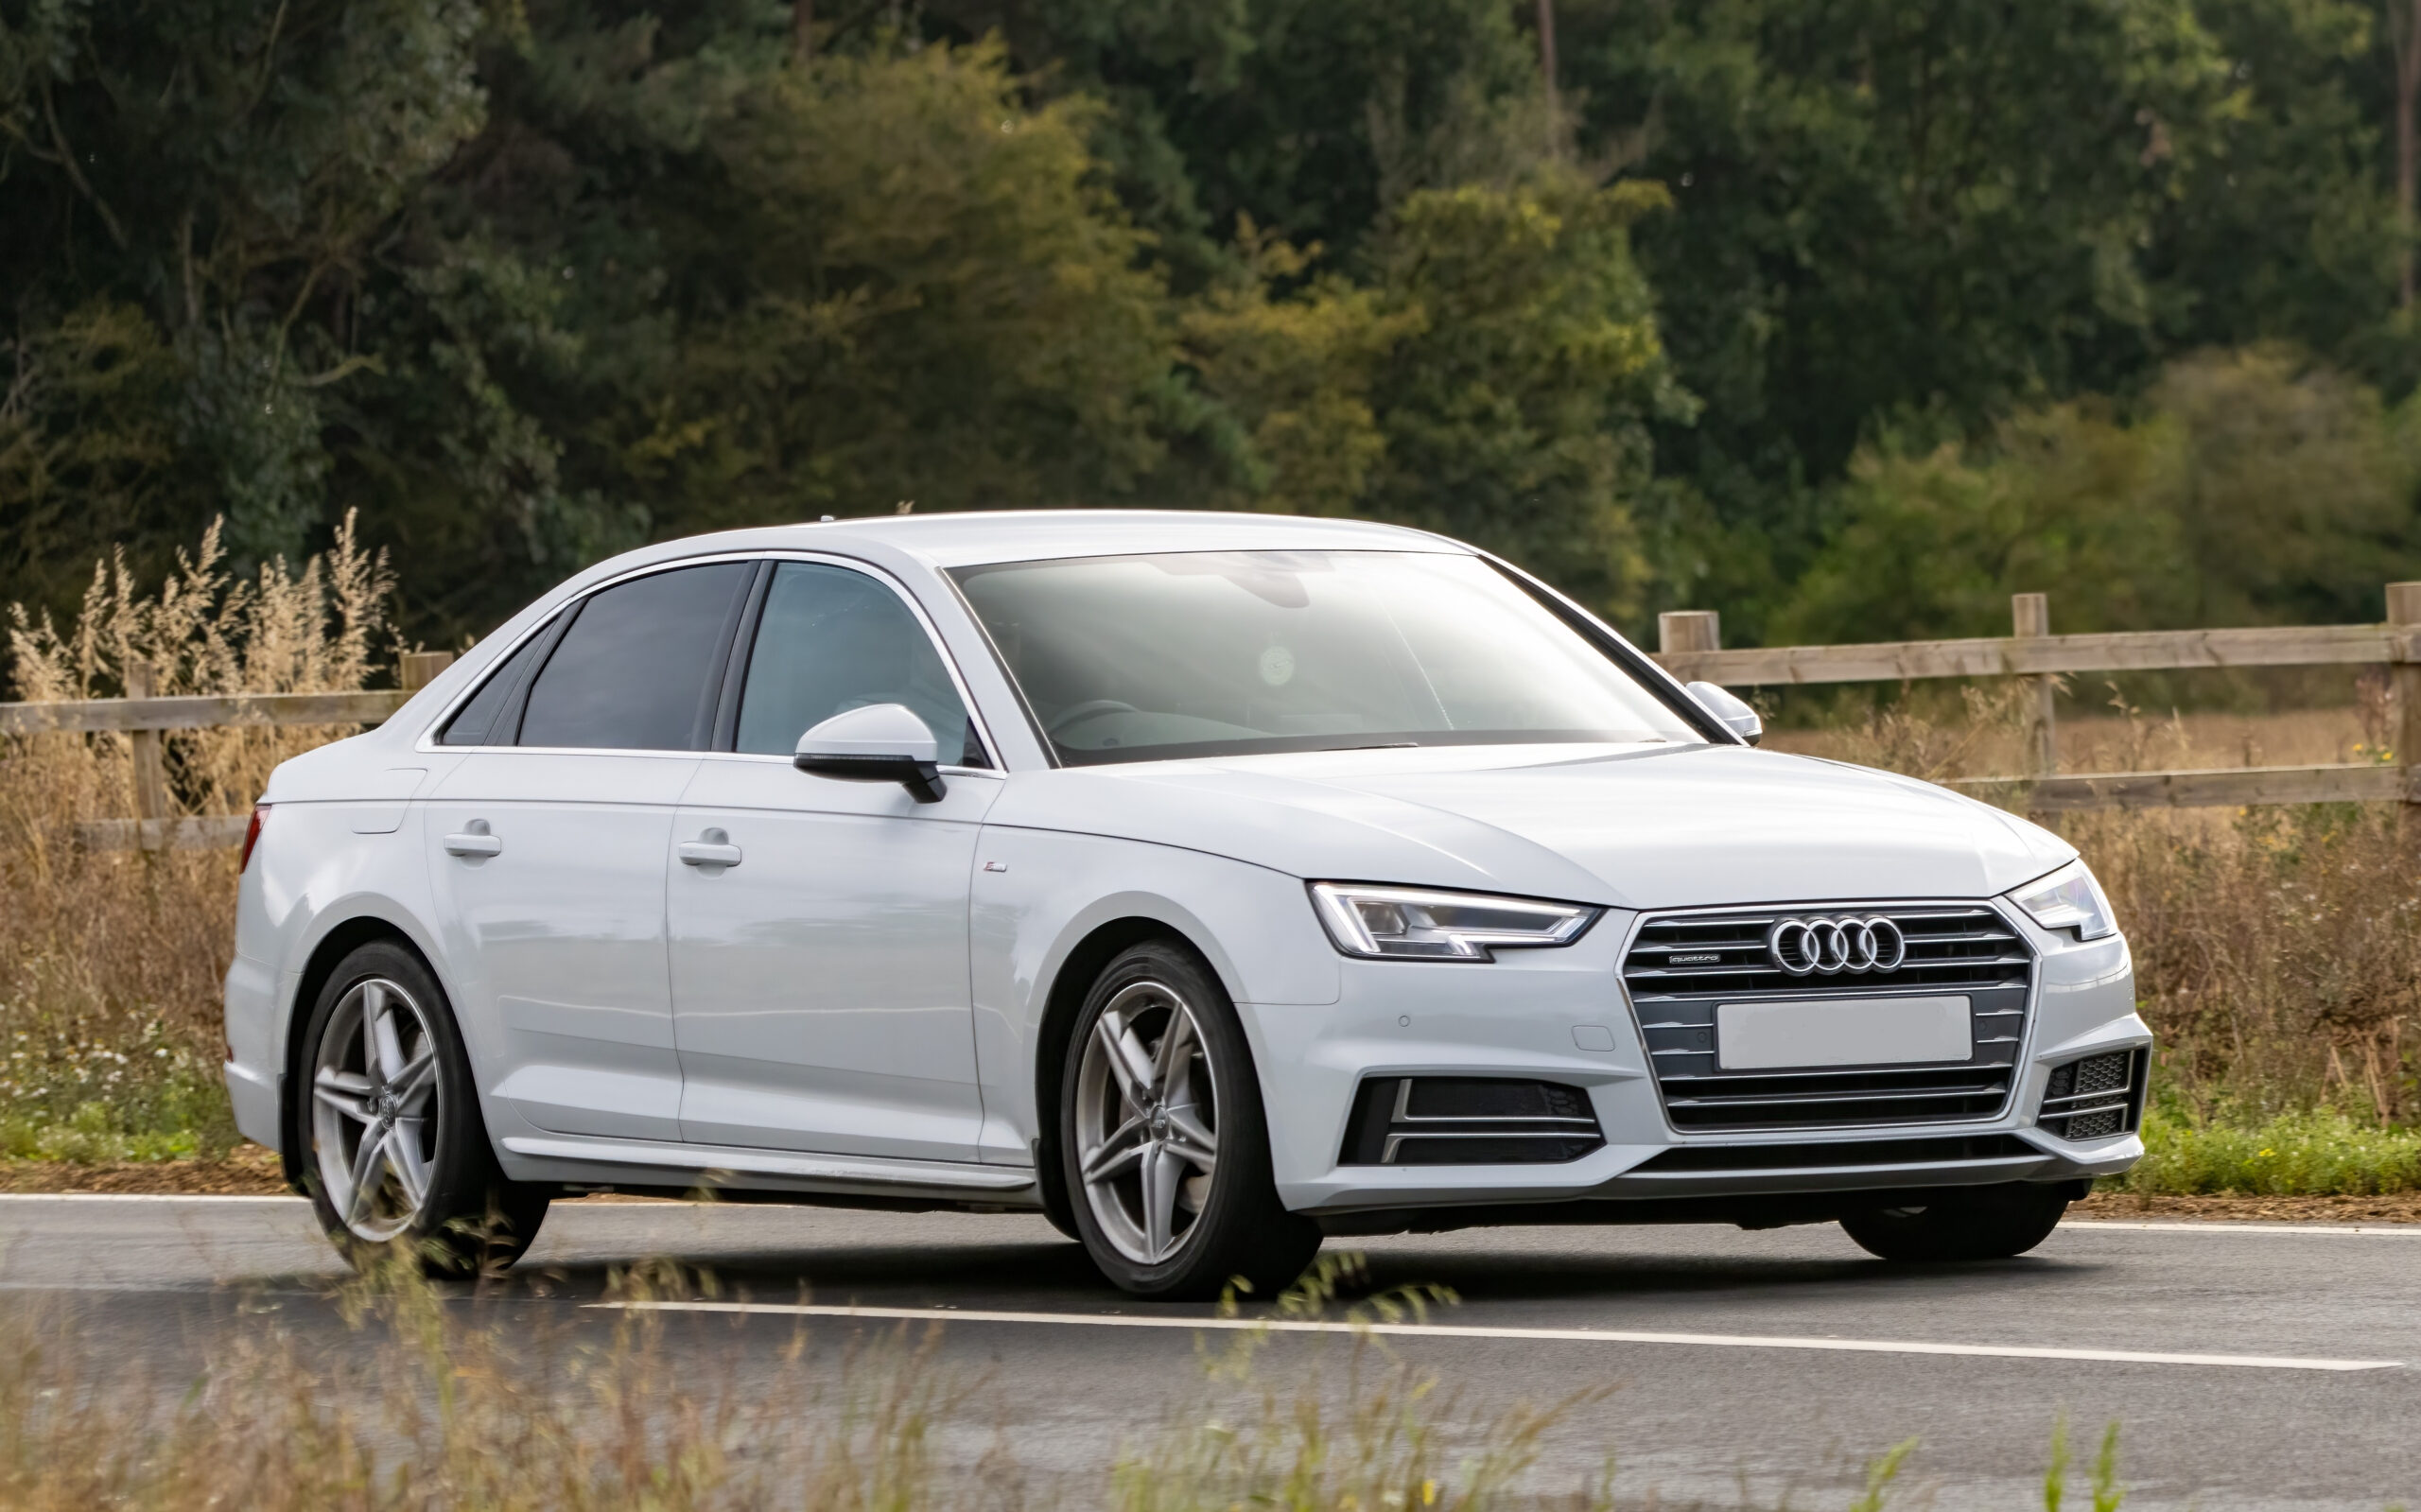 Audi A4 2018 Review | Full Specification